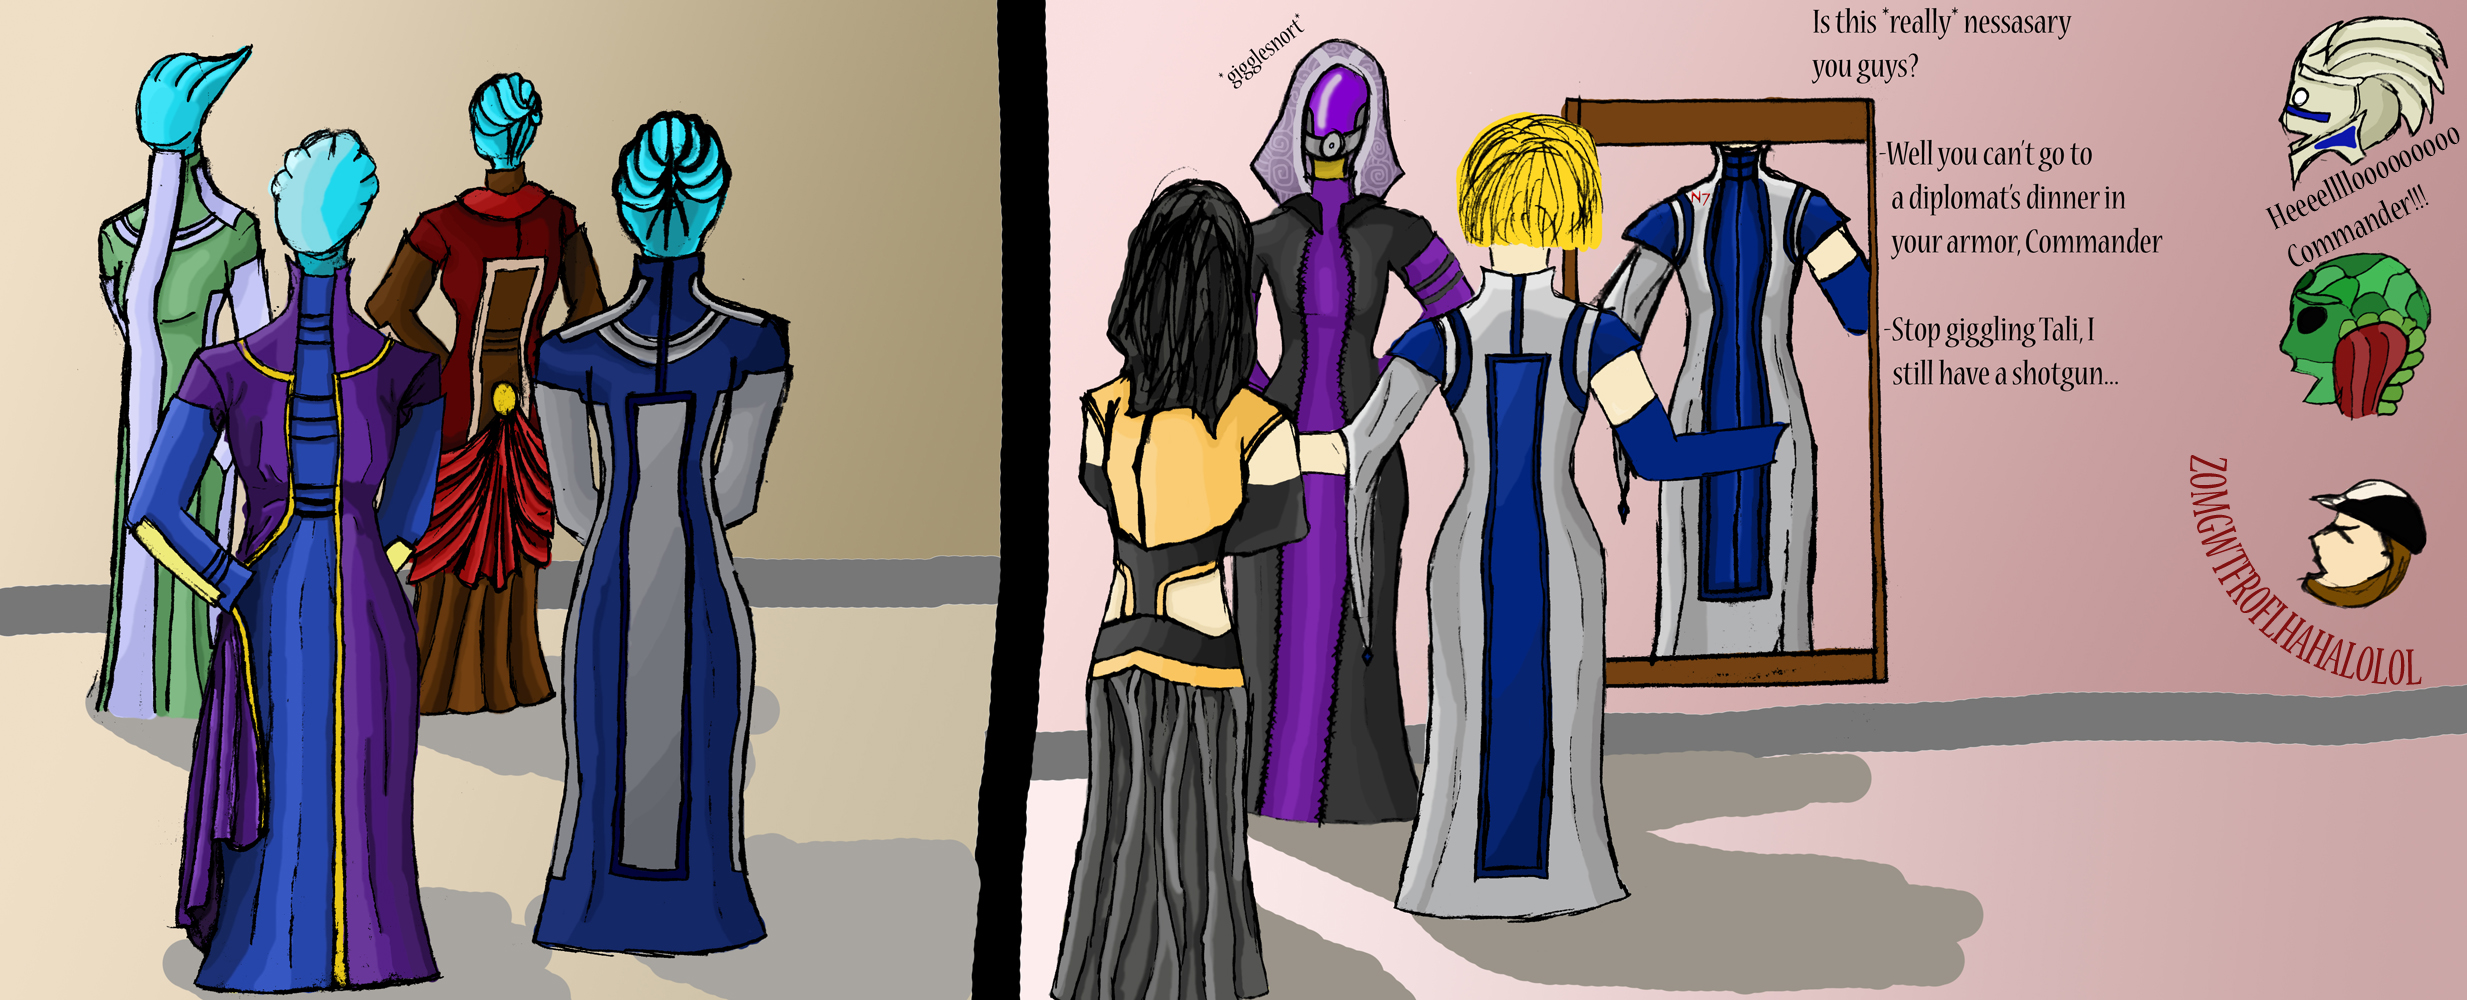 the_fitting_by_jediravenclaw-d3io8c3.jpg